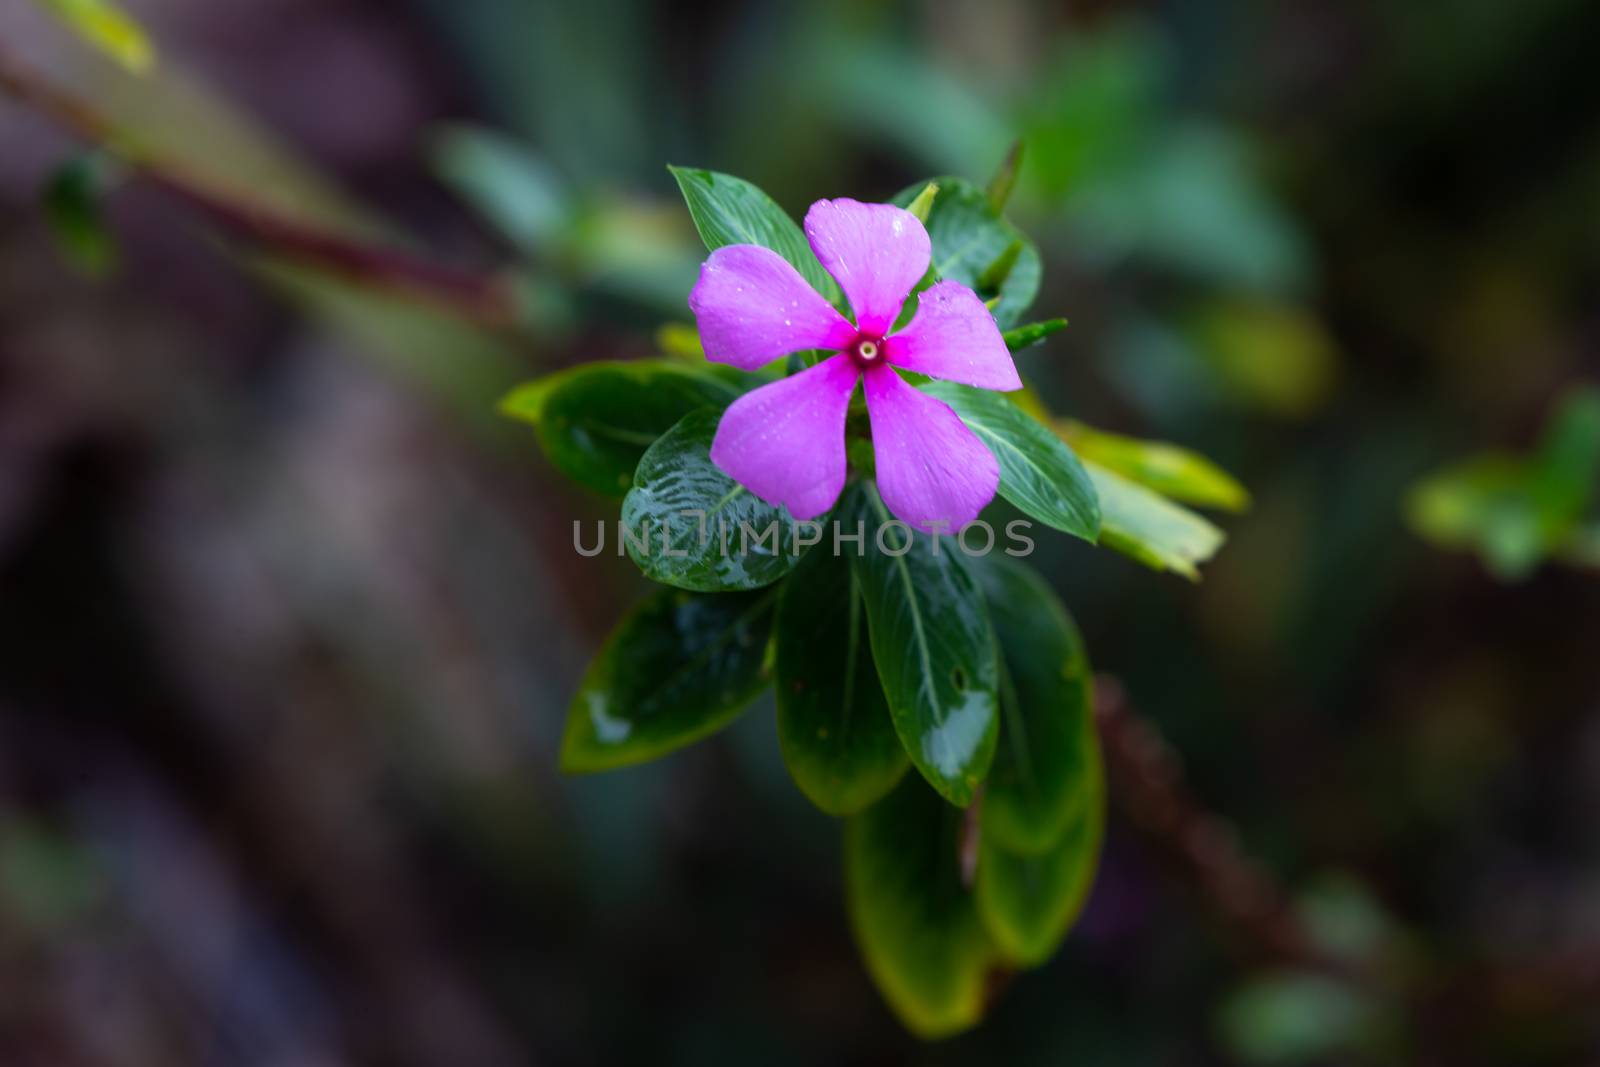 A purple native flower of the island of Madagascar by 25ehaag6